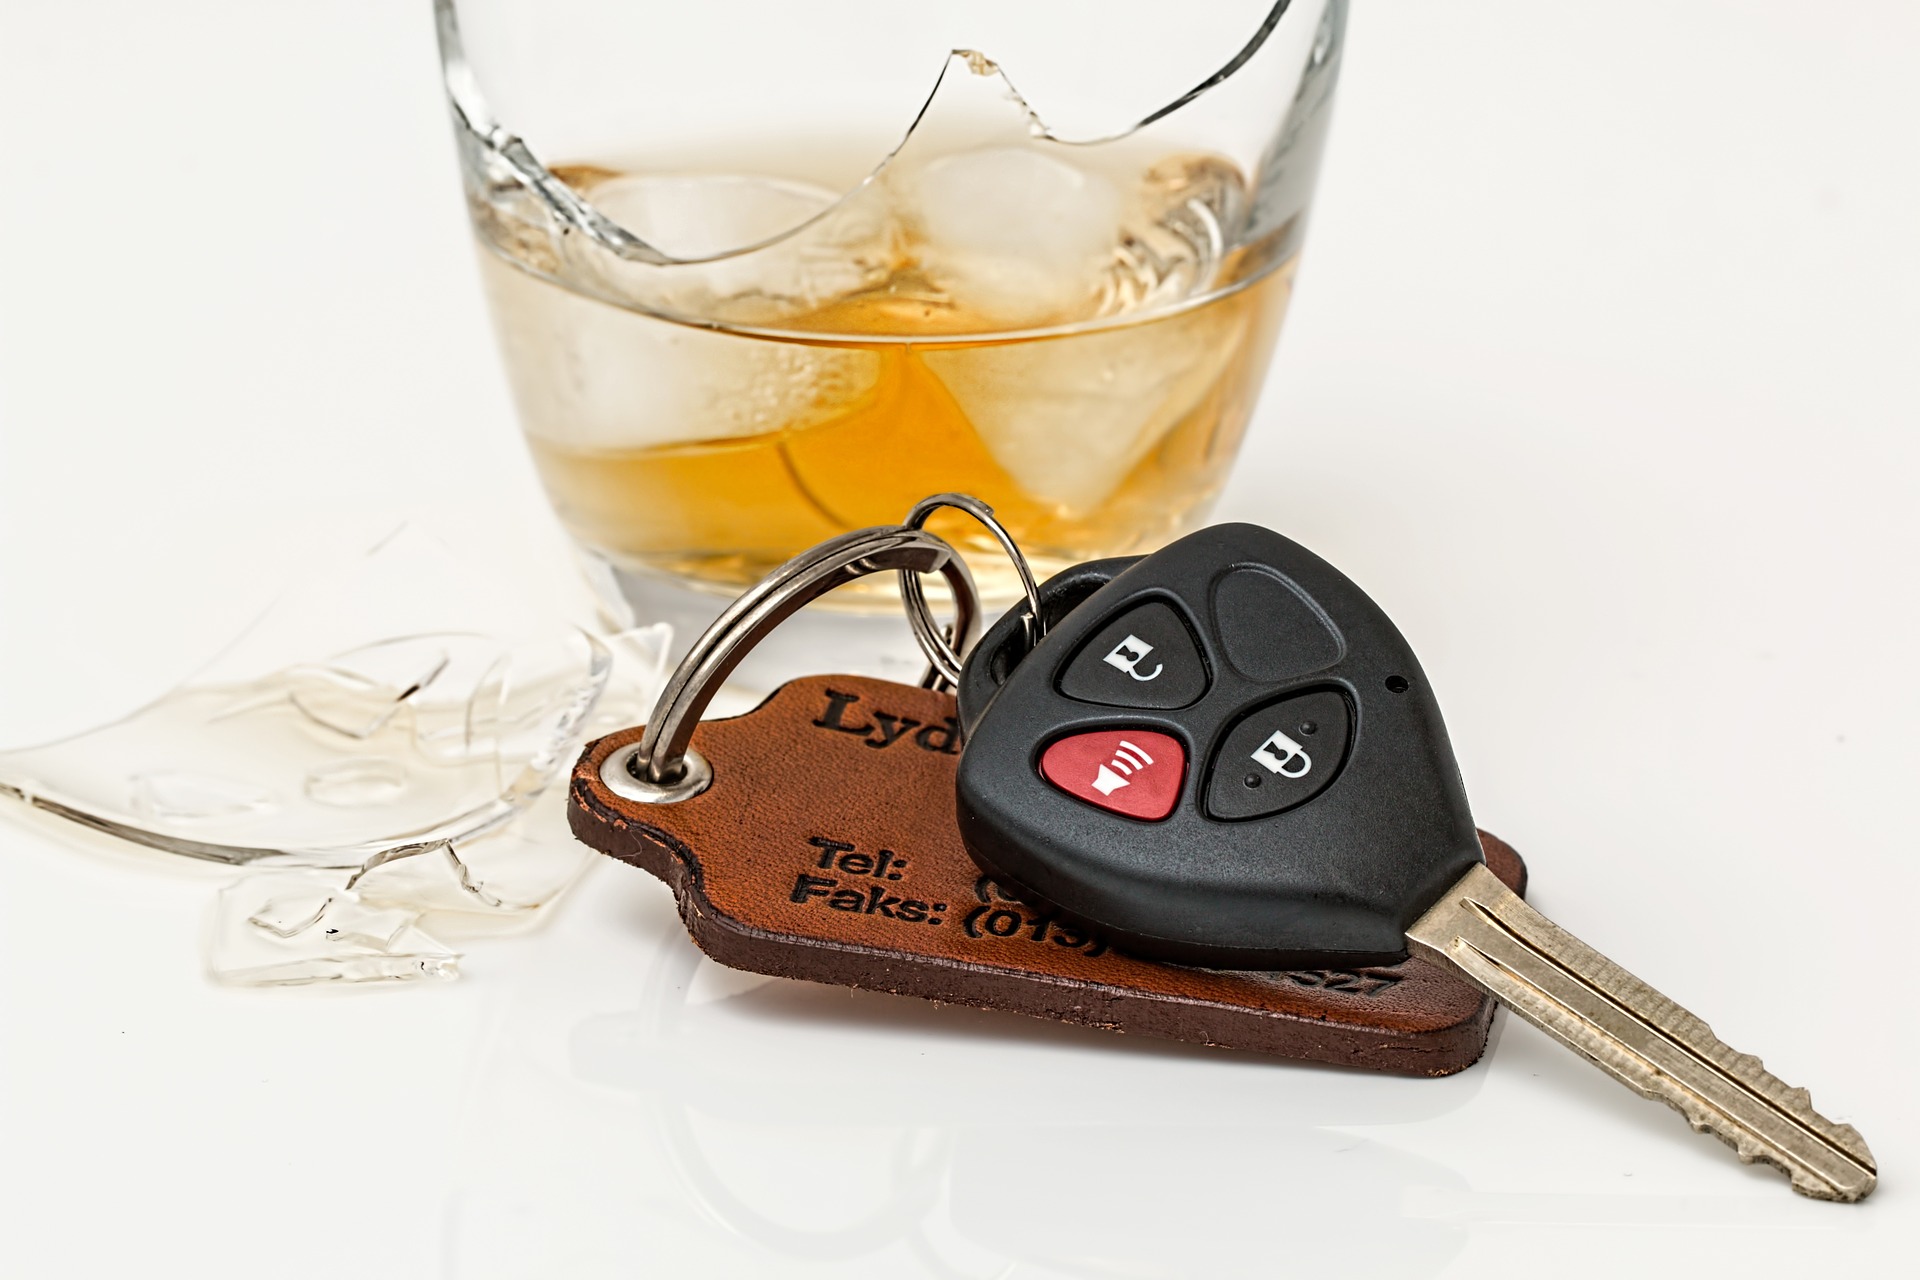 Driving under the influence of alcohol